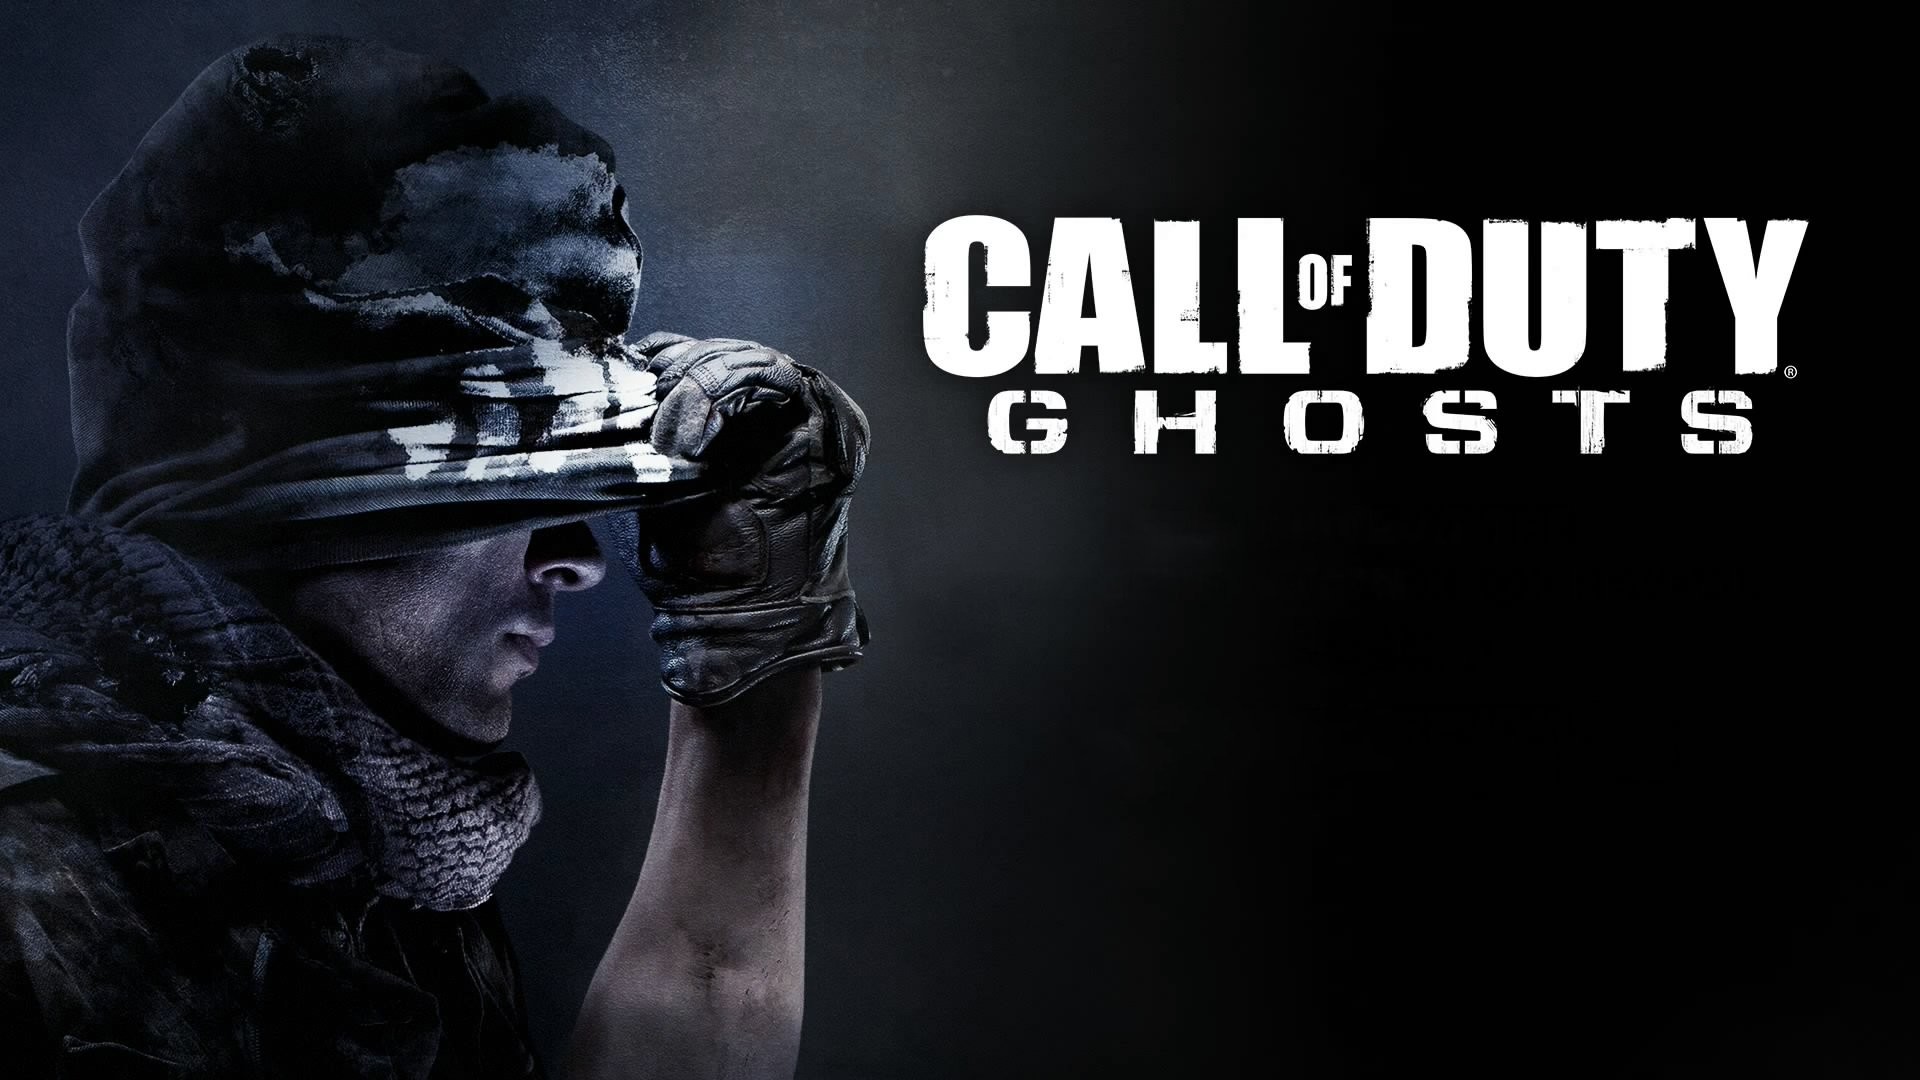 1920x1080 Call of Duty Ghosts PS4 Wallpaper